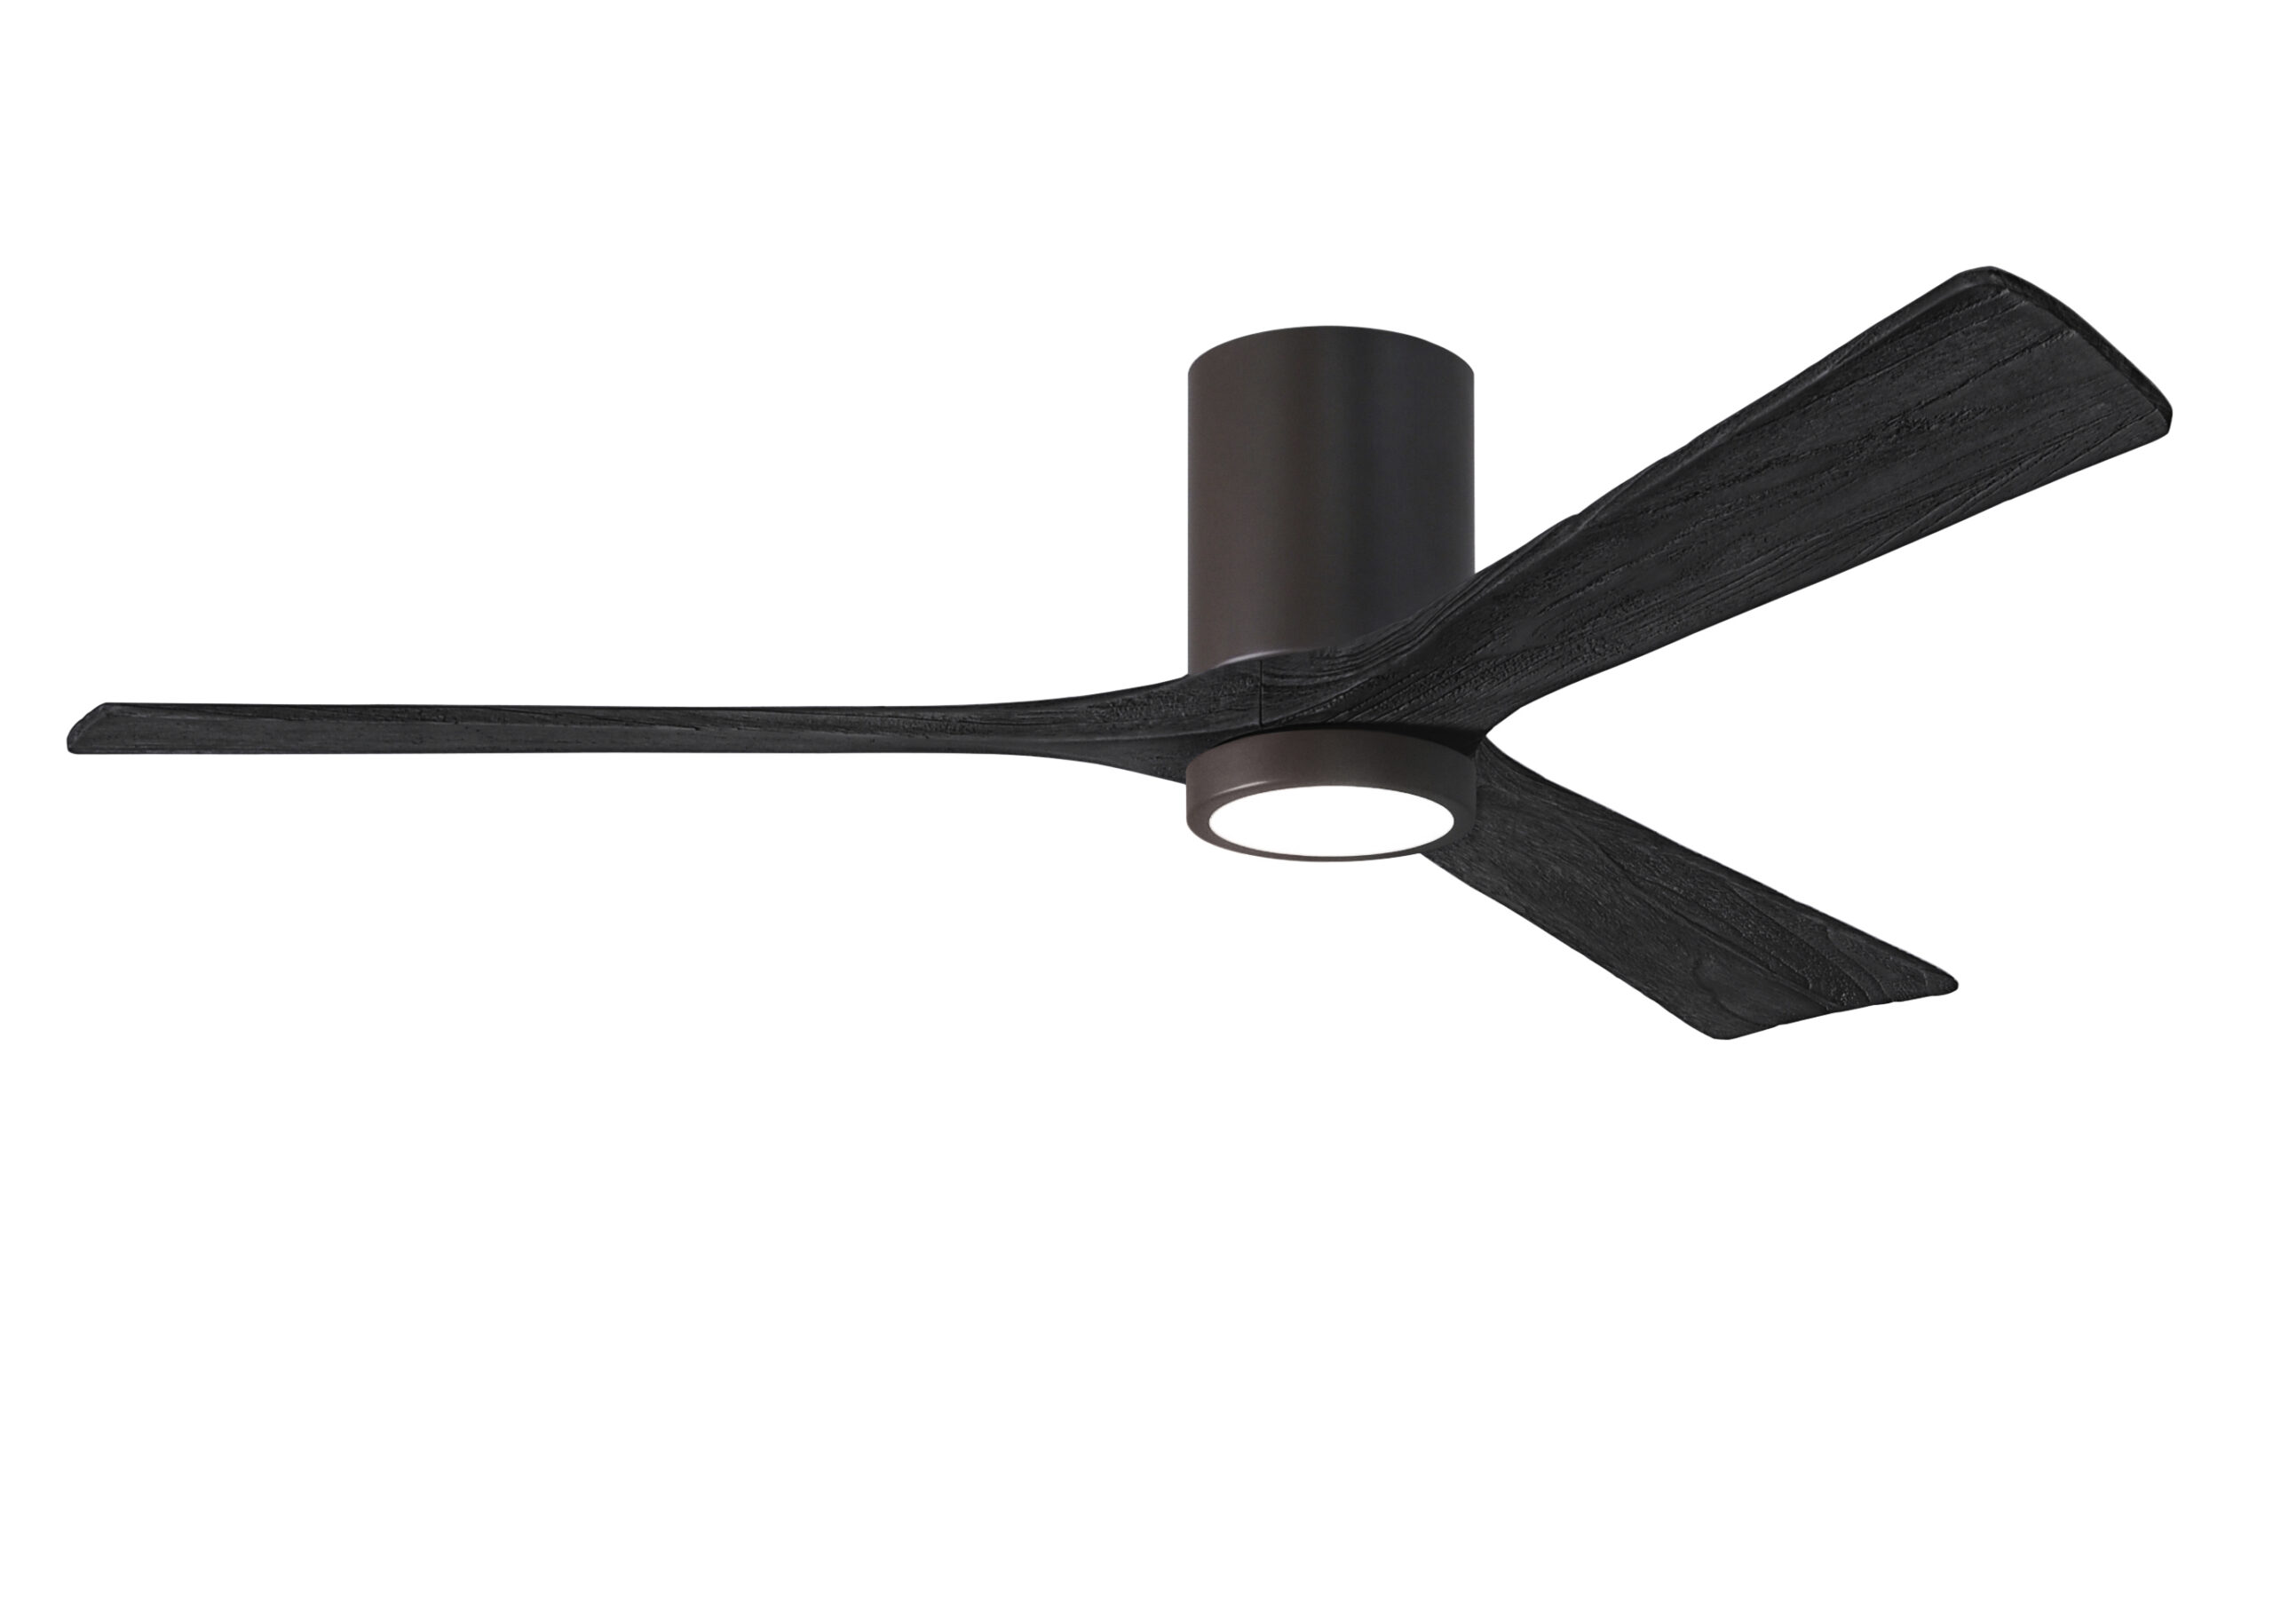 Irene-3HLK Ceiling Fan in Textured Bronze Finish with 60